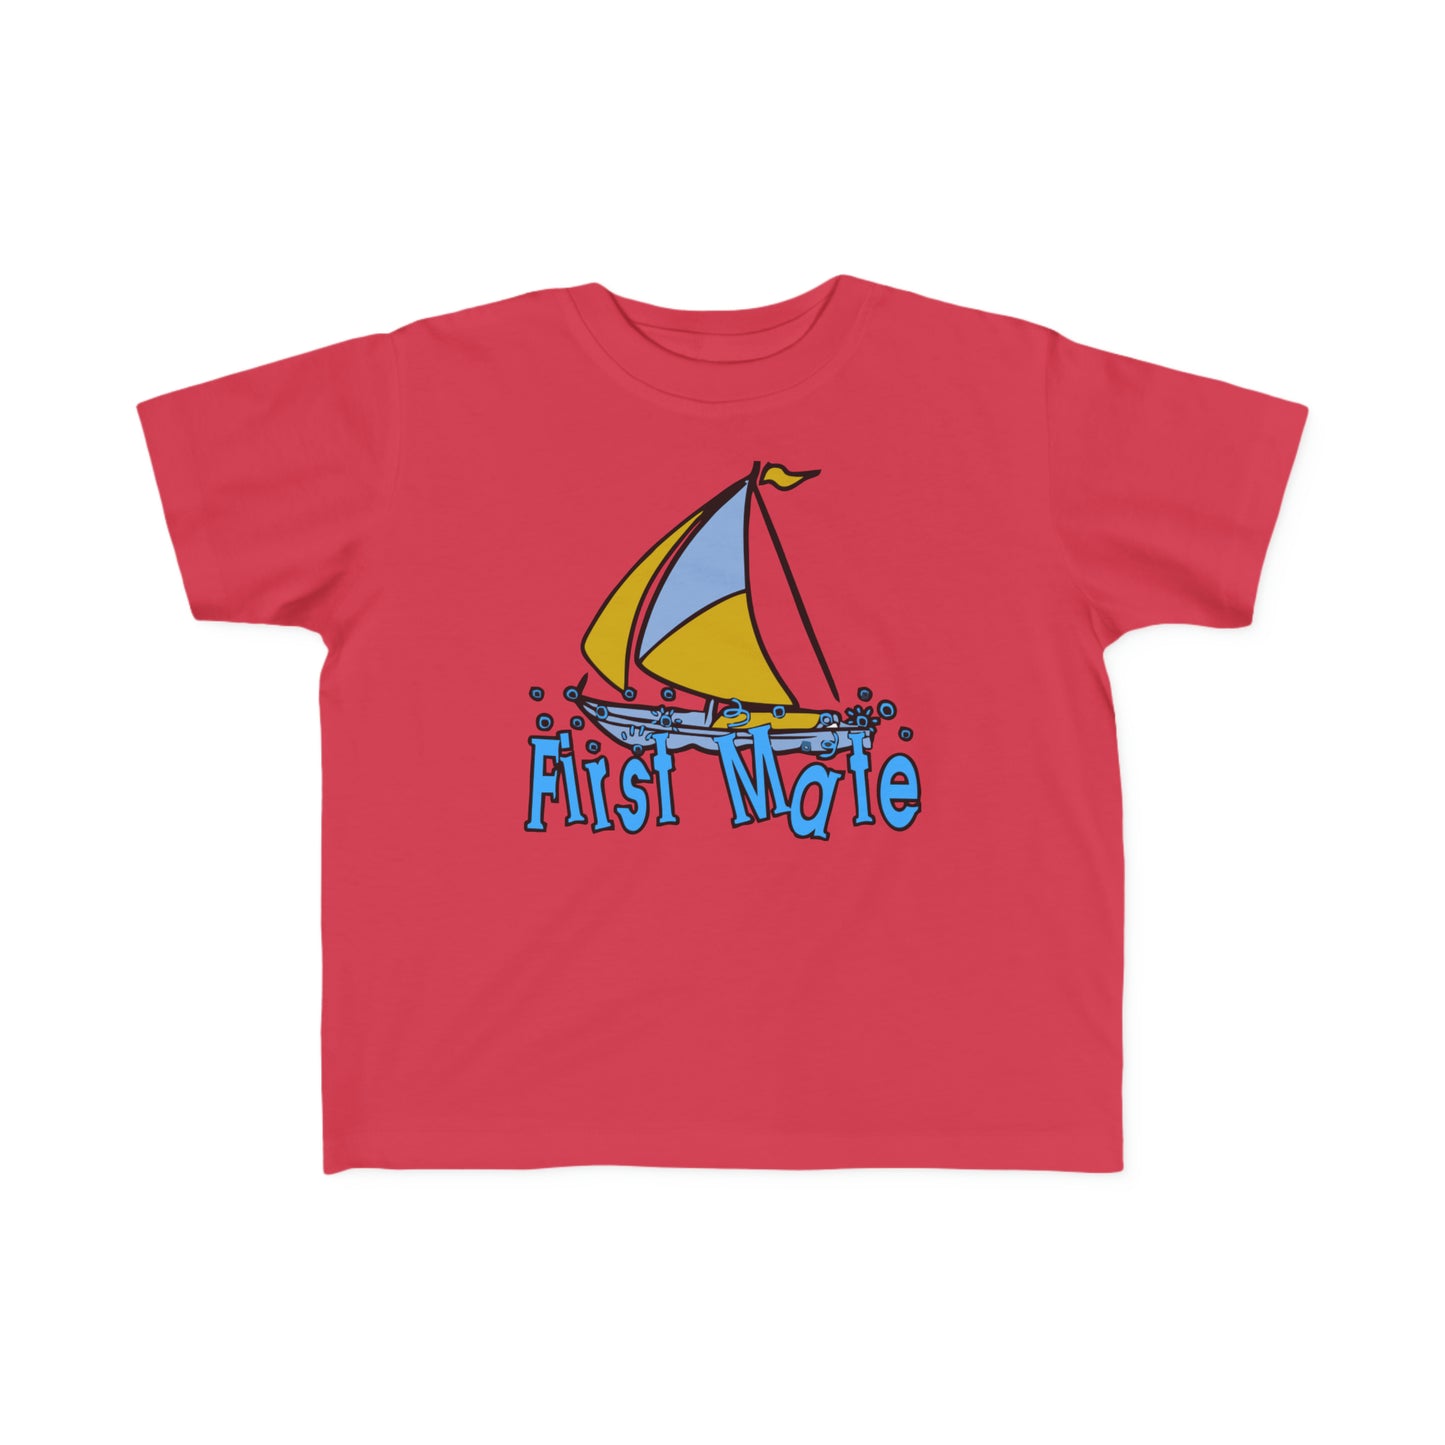 First Mate Toddler T-shirt, Little Sailor Tee, Sailboat Design, Sailor Boy Gift, Future Sailor, Gift for Sailing Enthusiasts, Shower Gift,